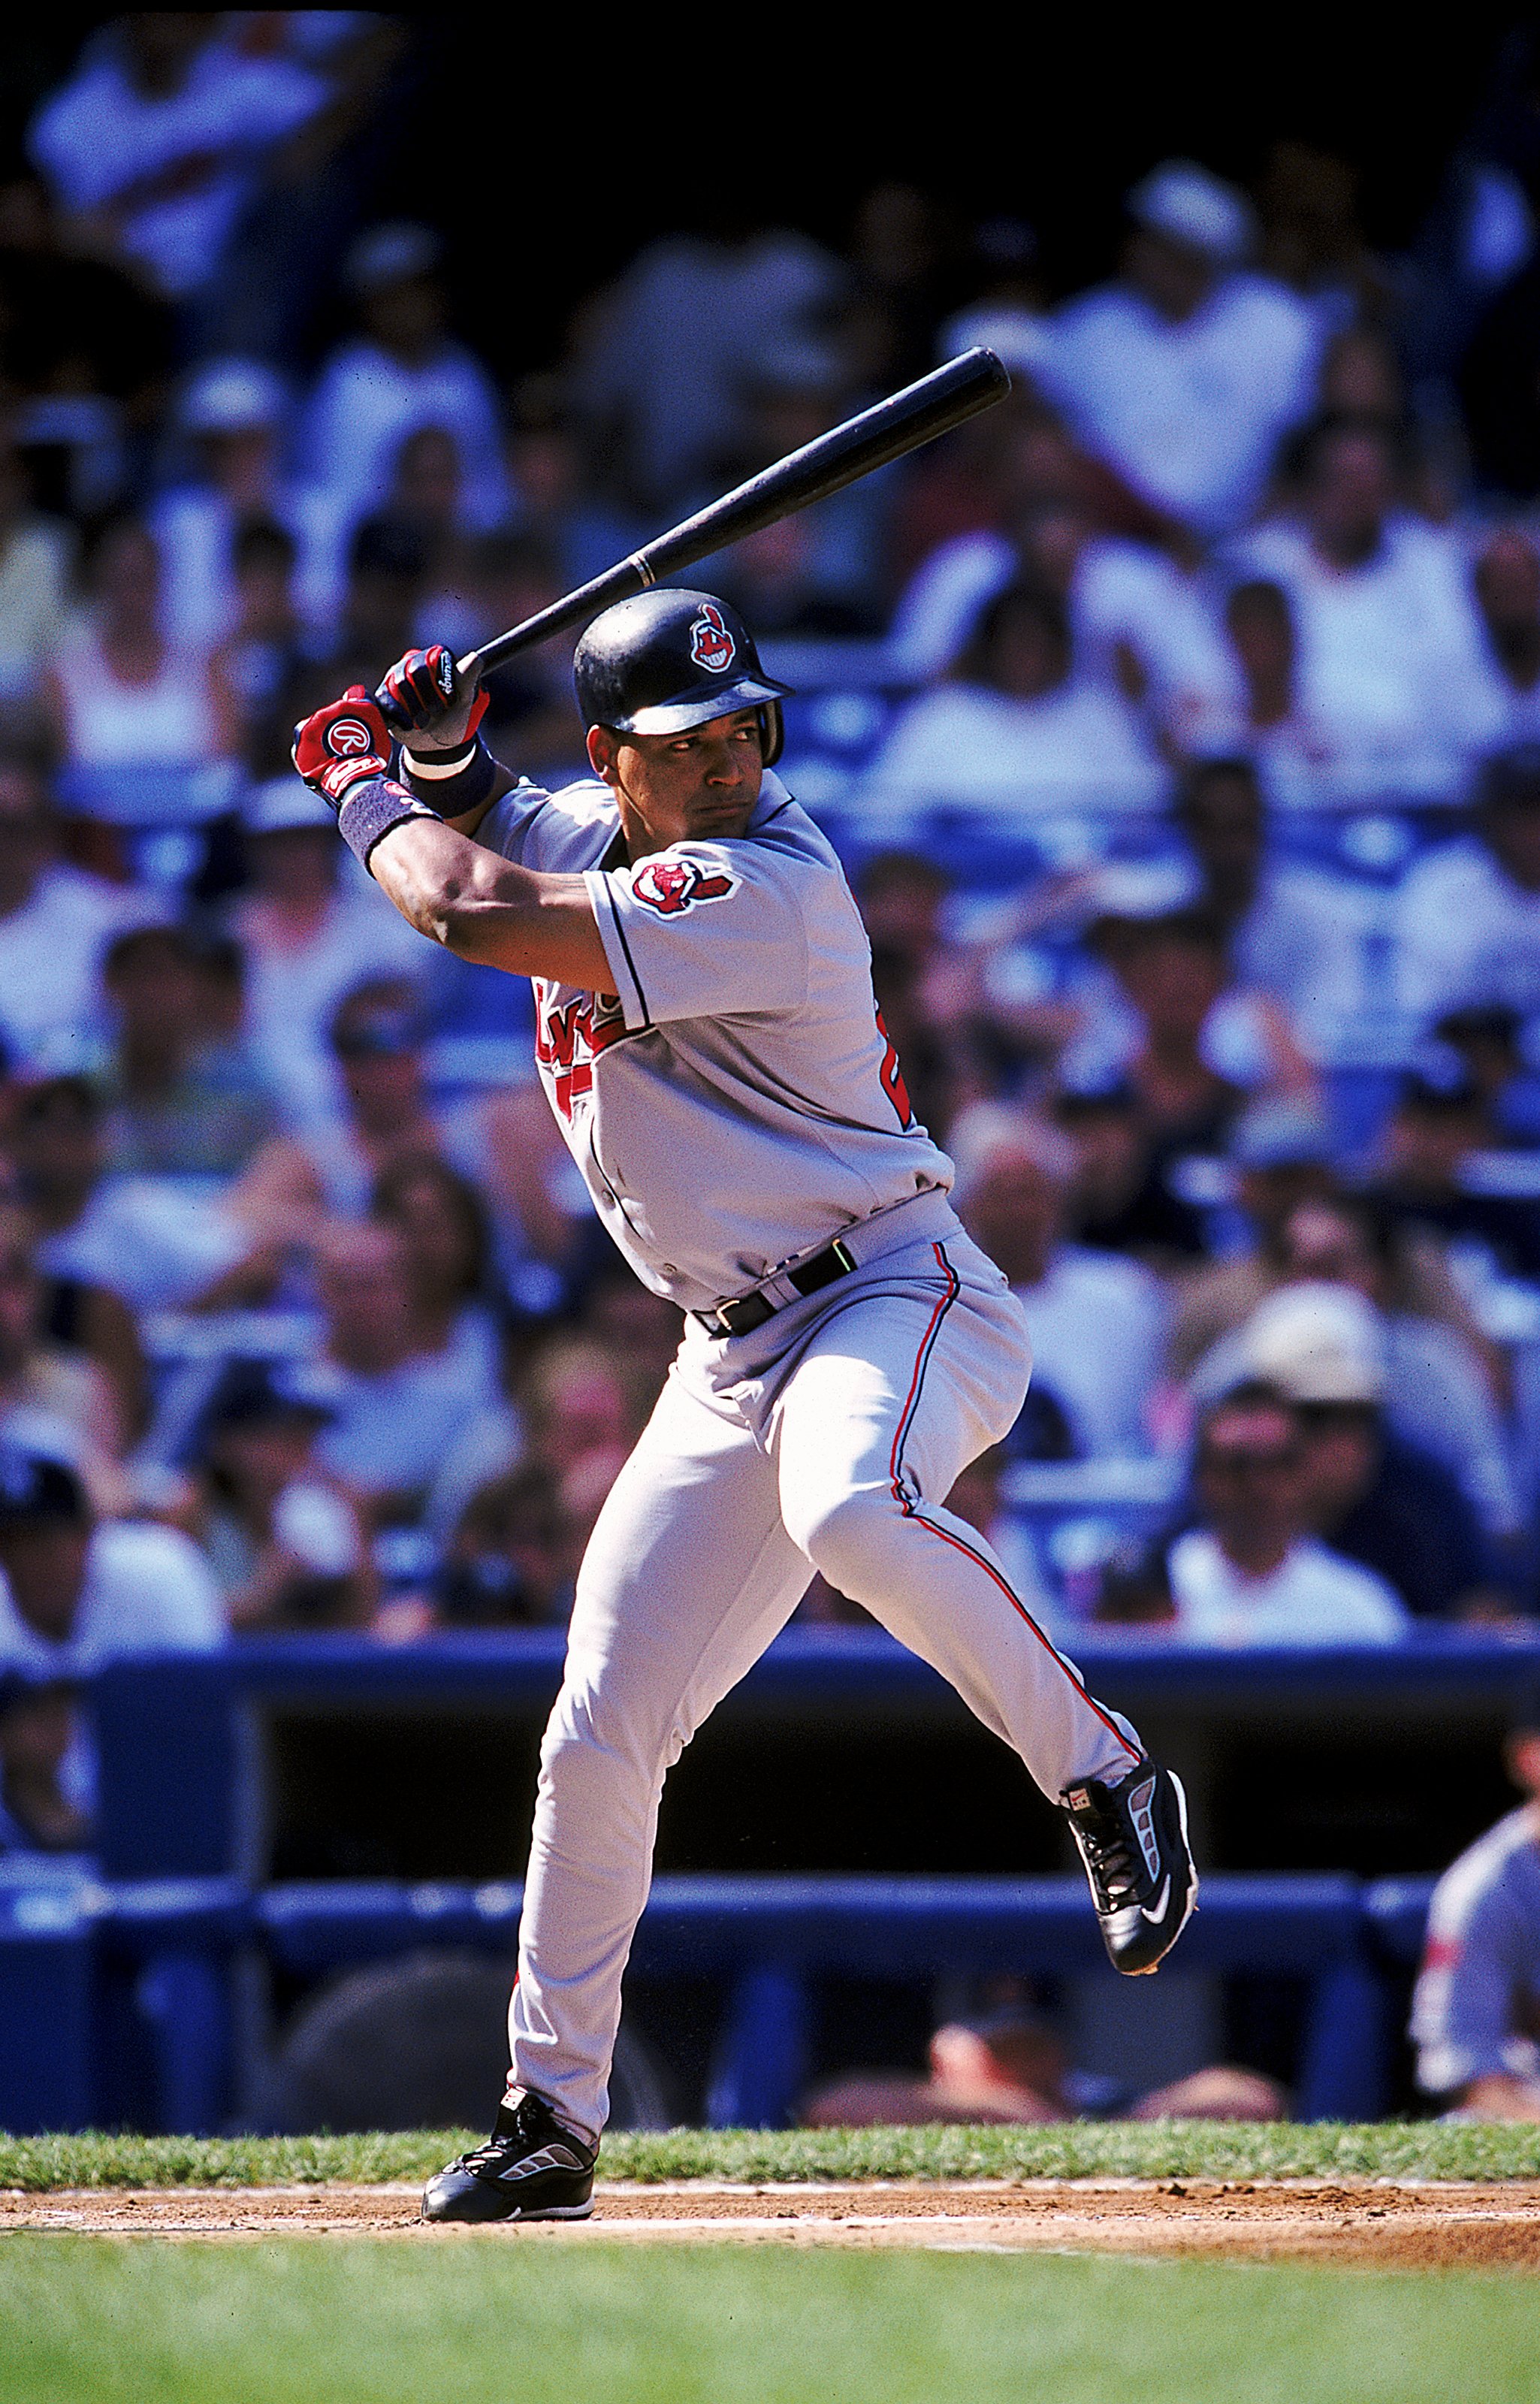 24 Jul 1999: Manny Ramirez #24 of the Cleveland Indians steps into the swing during the game against the New York Yankees at Yankee Stadium in the Bronx. The Yankees defeated the Indians 21-1. Mandatory Credit: Ezra O. Shaw  /Allsport